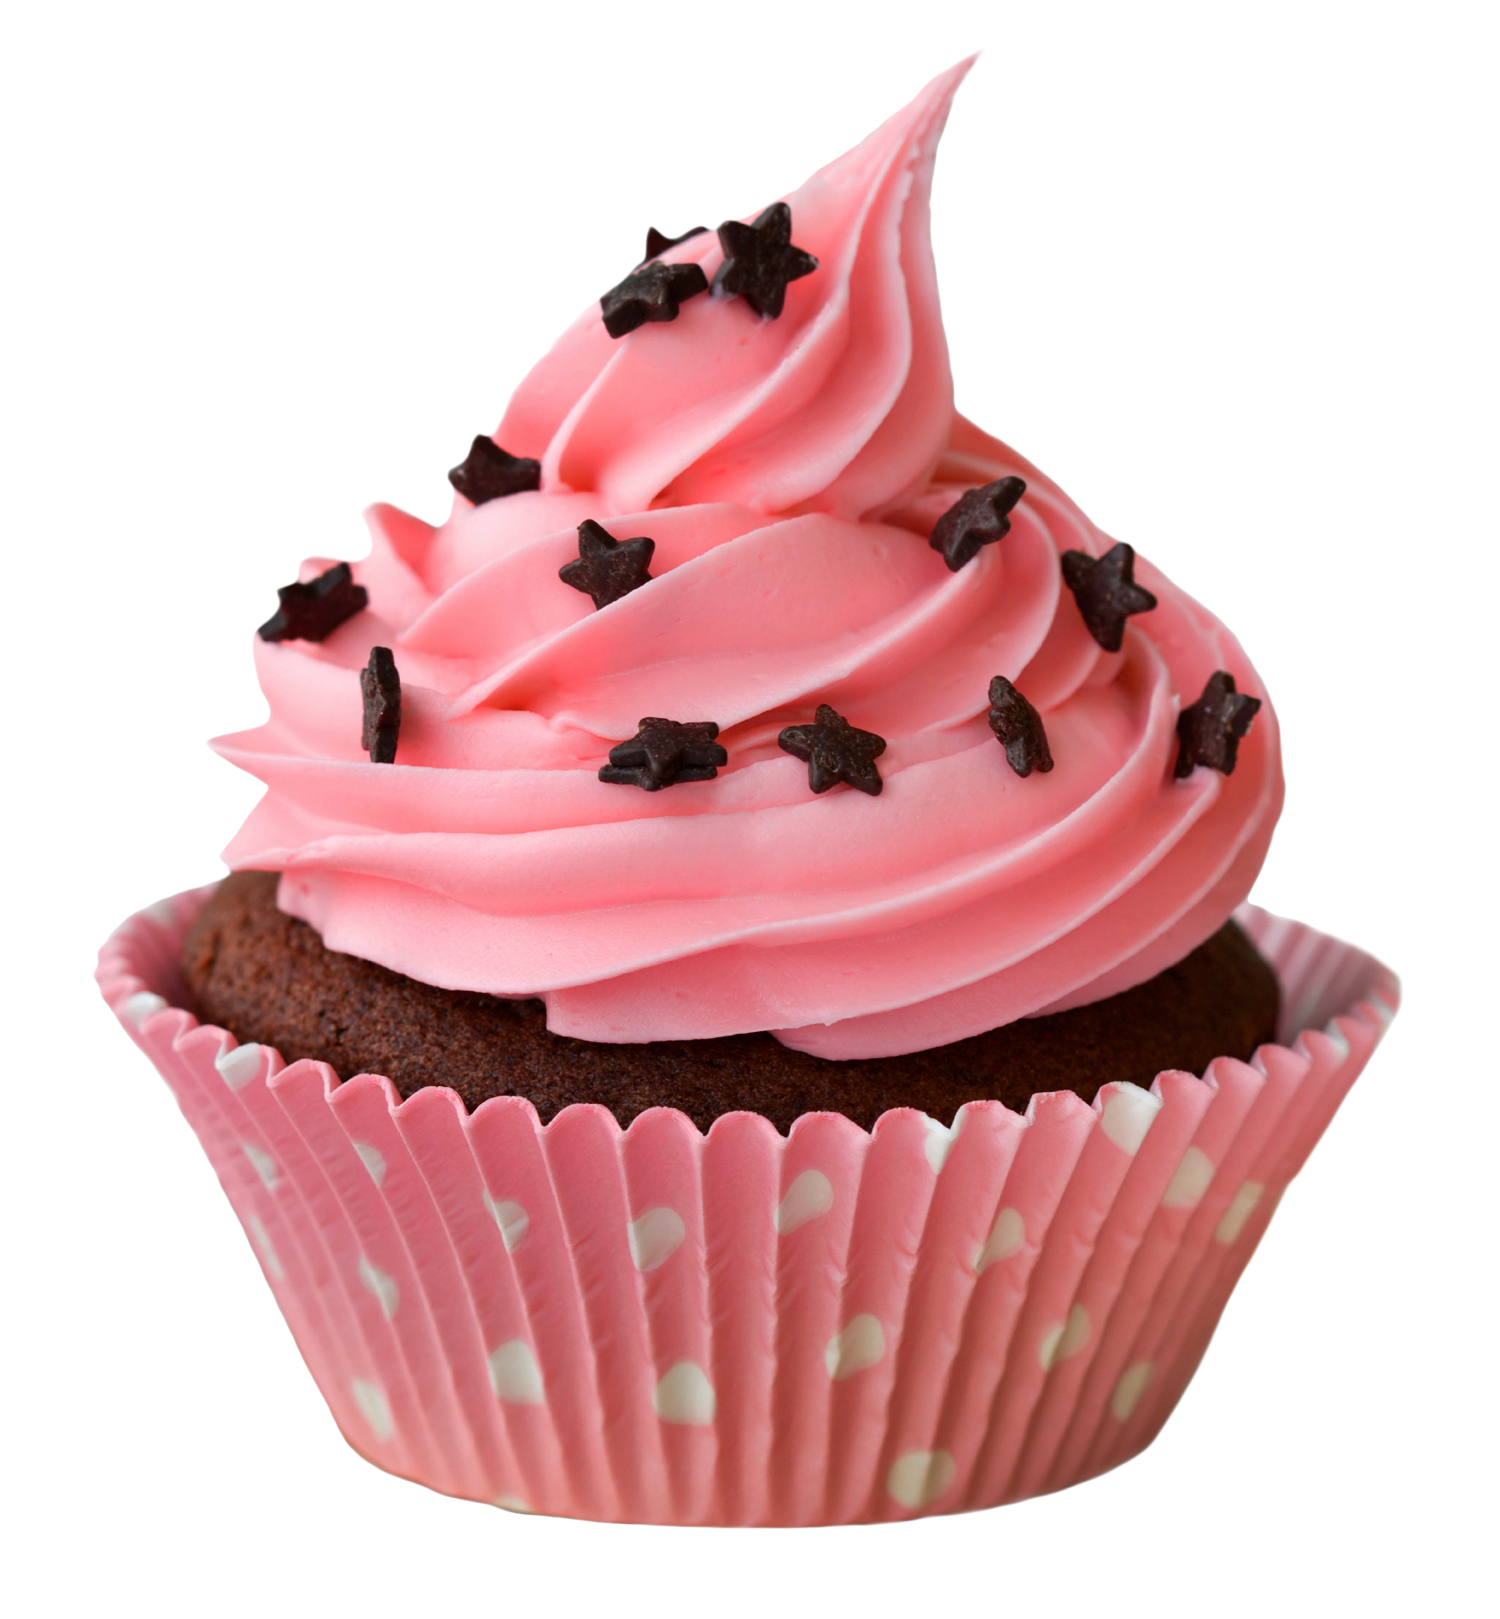 A Cupcake With Pink Frosting And Chocolate Sprinkles